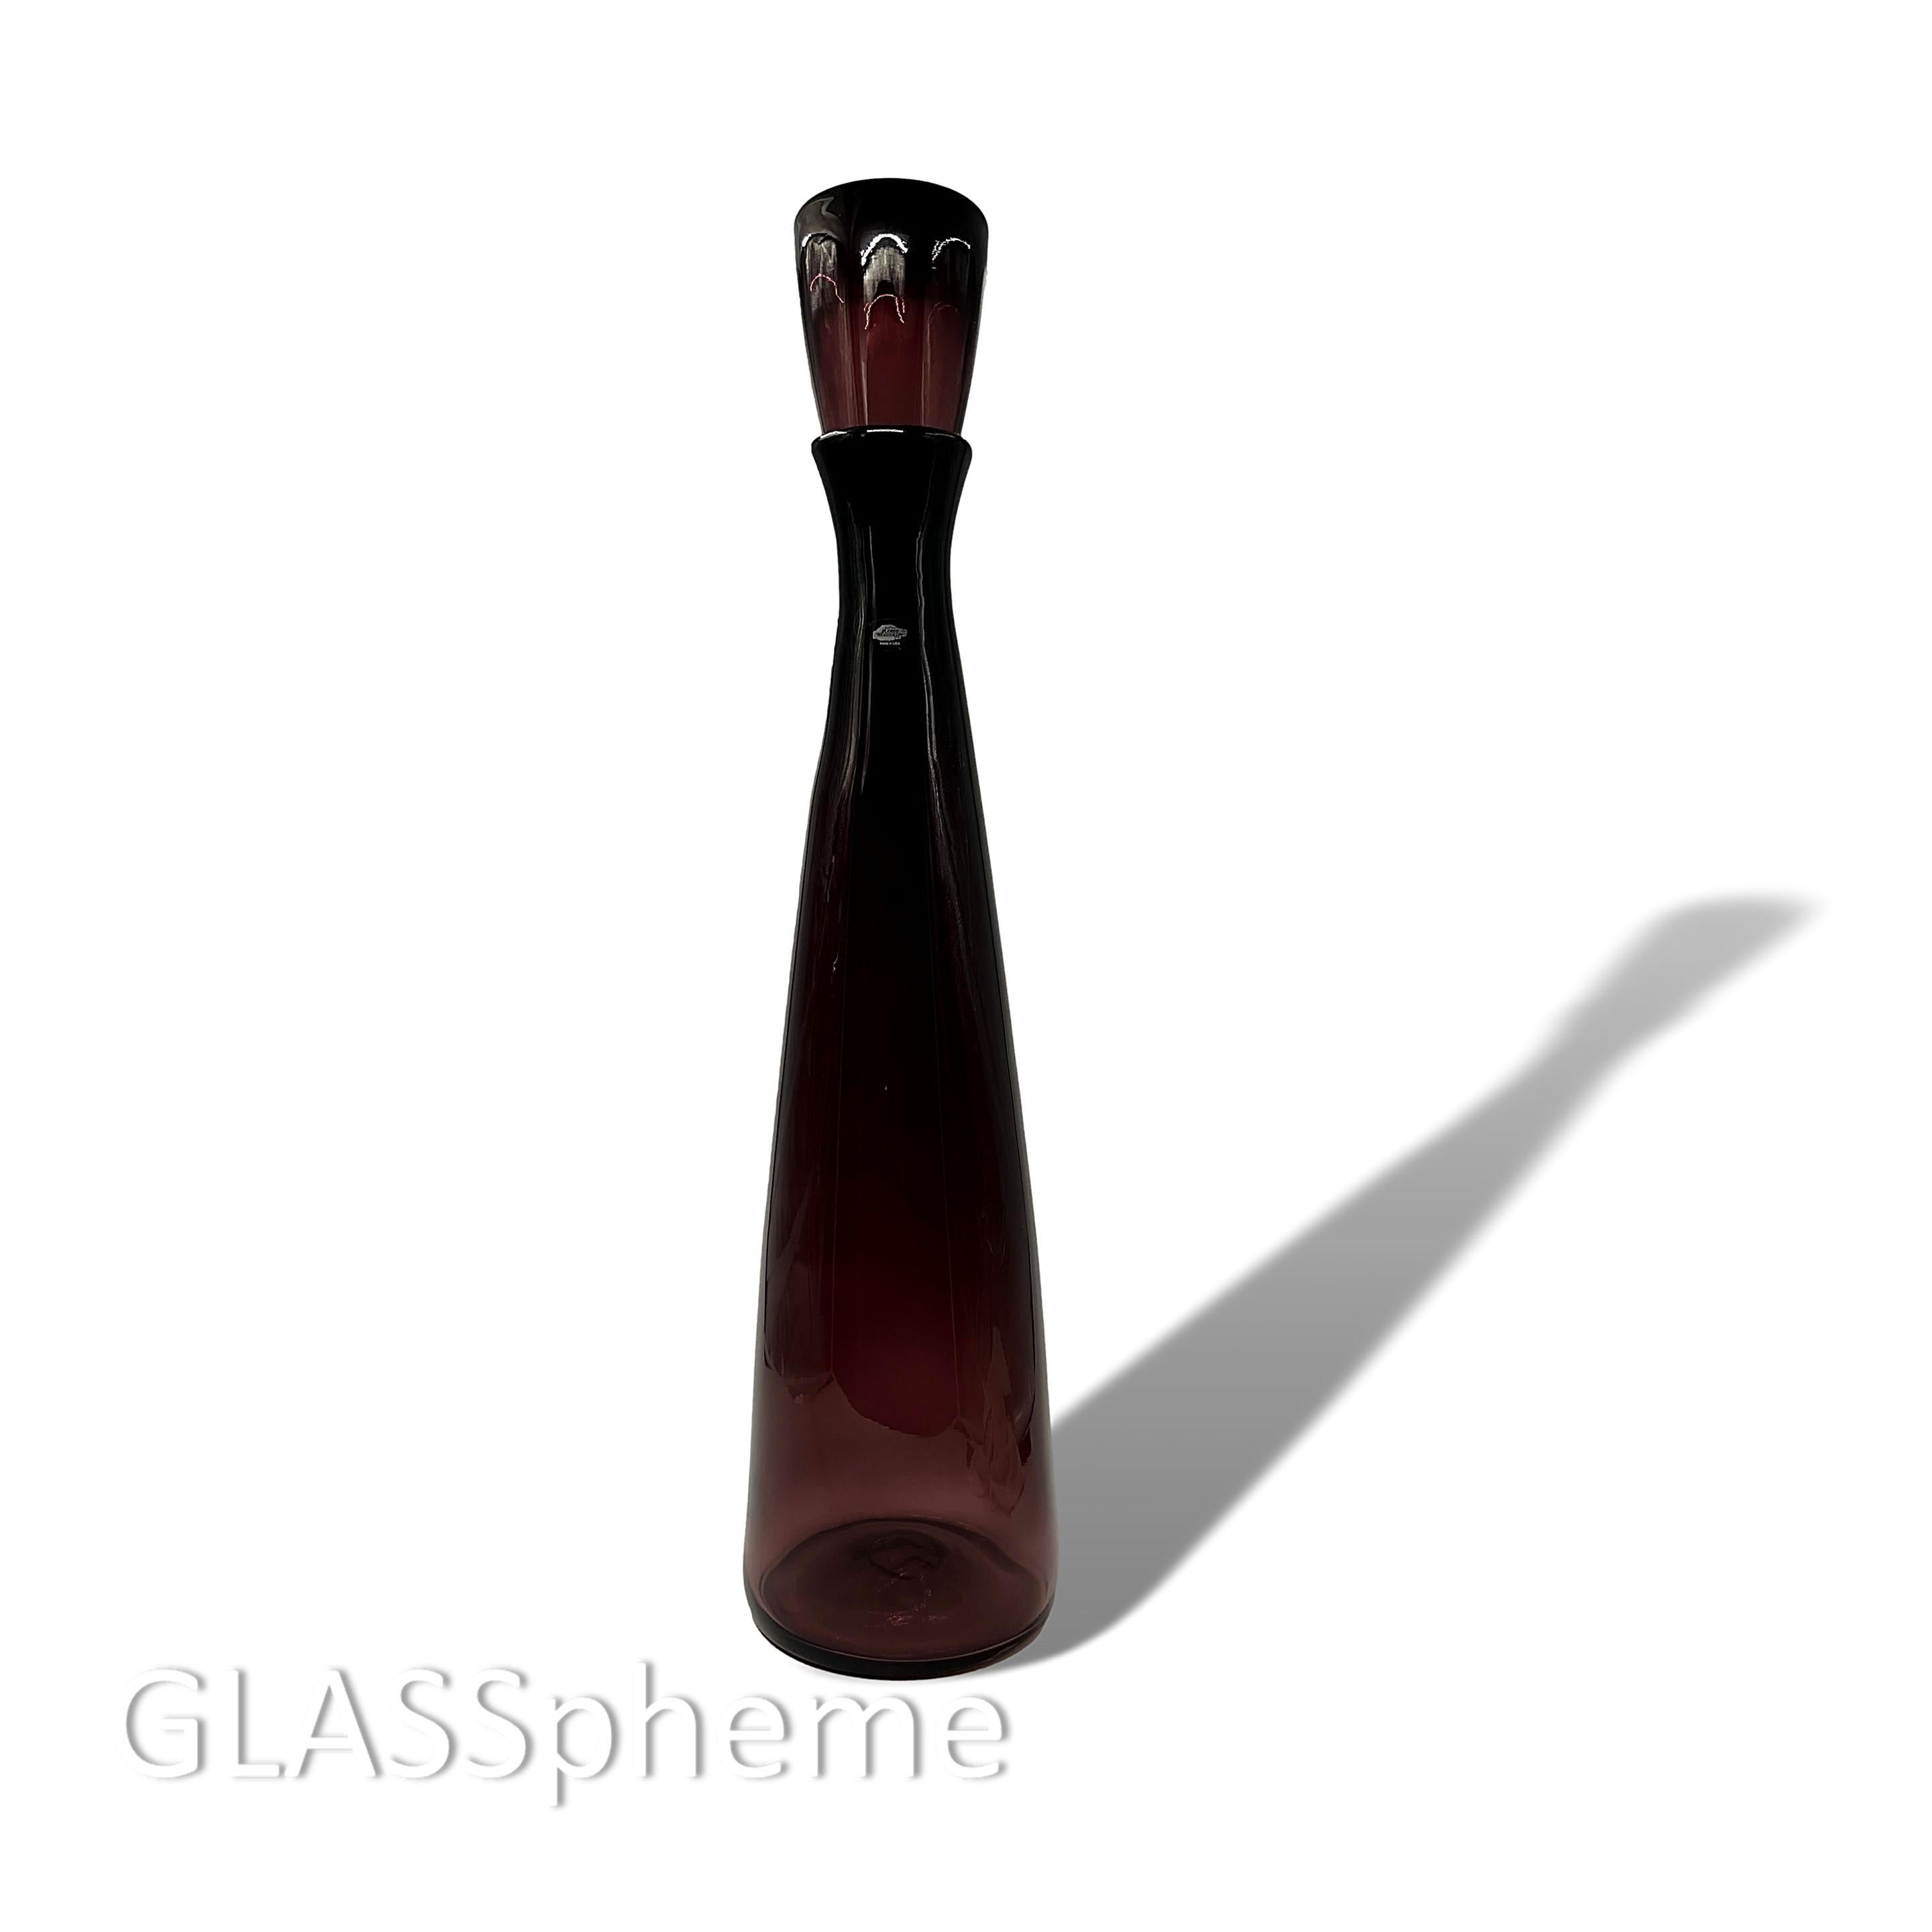 The clean modern lines of Blenko's #6138 architectural decanter, designed by Wayne Husted for the 1961 catalog, made it so sustainably popular that Blenko produced it for the whole of the 1960s and the 1970s. And then, around a quarter of a century